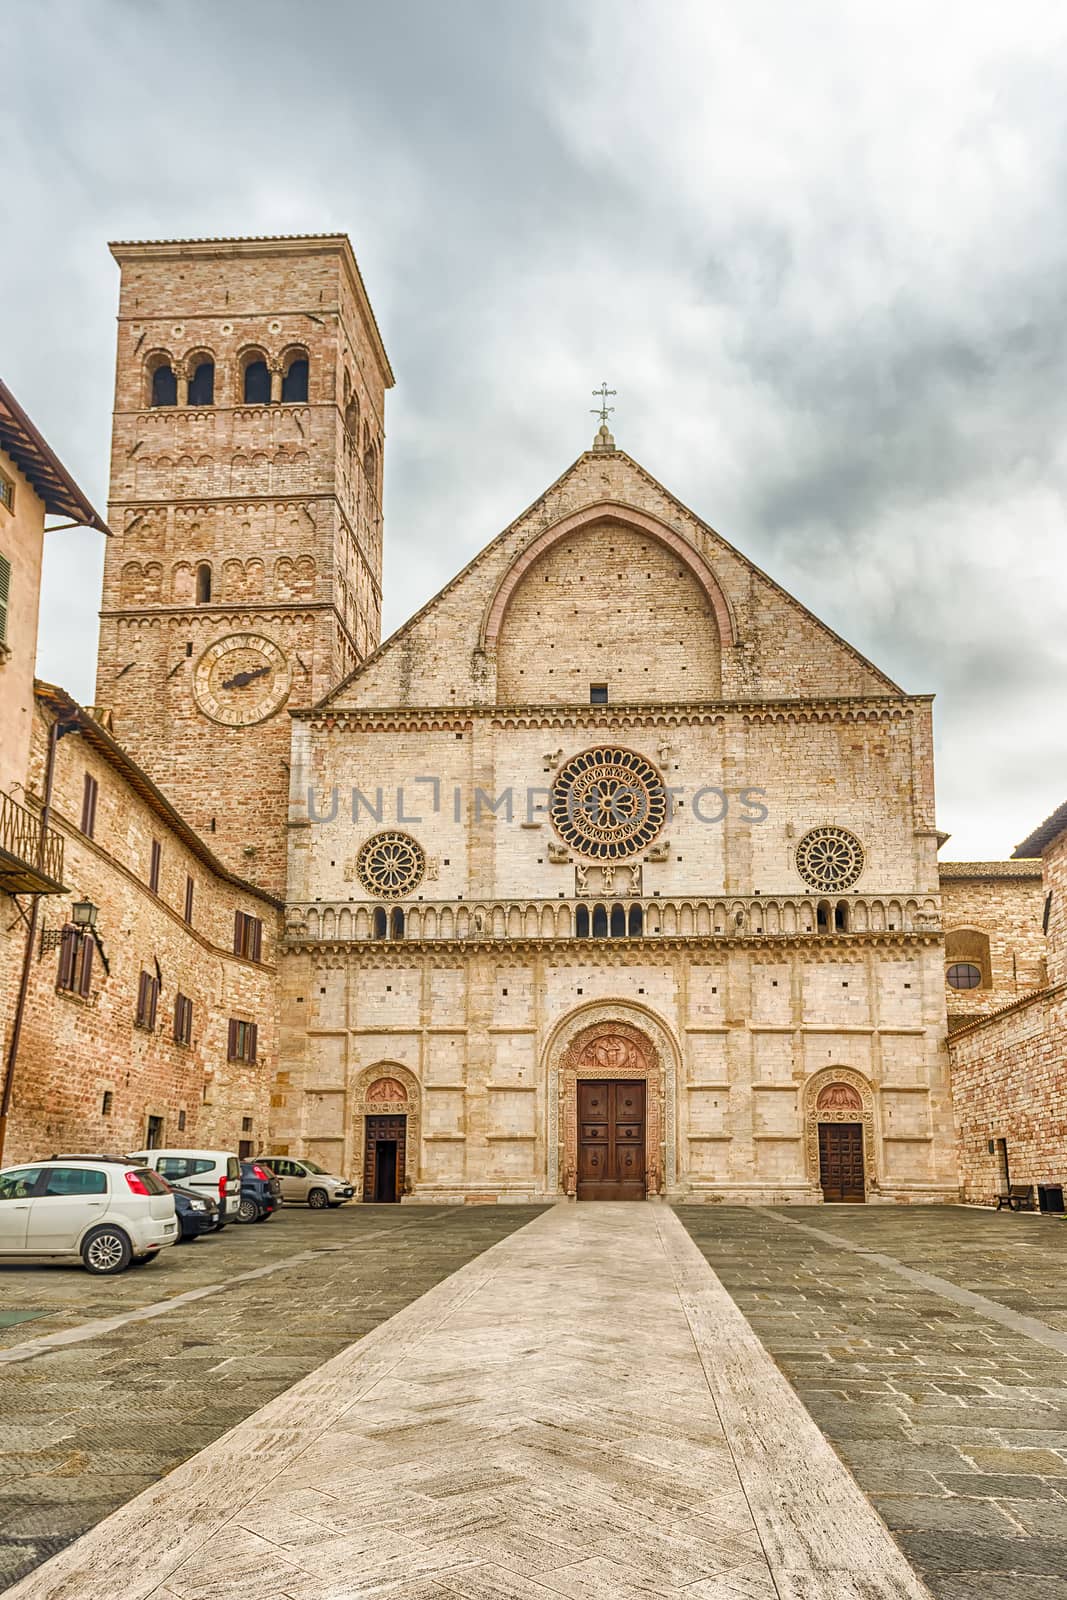 Exterior view of the medieval Cathedral of Assisi, Italy by marcorubino